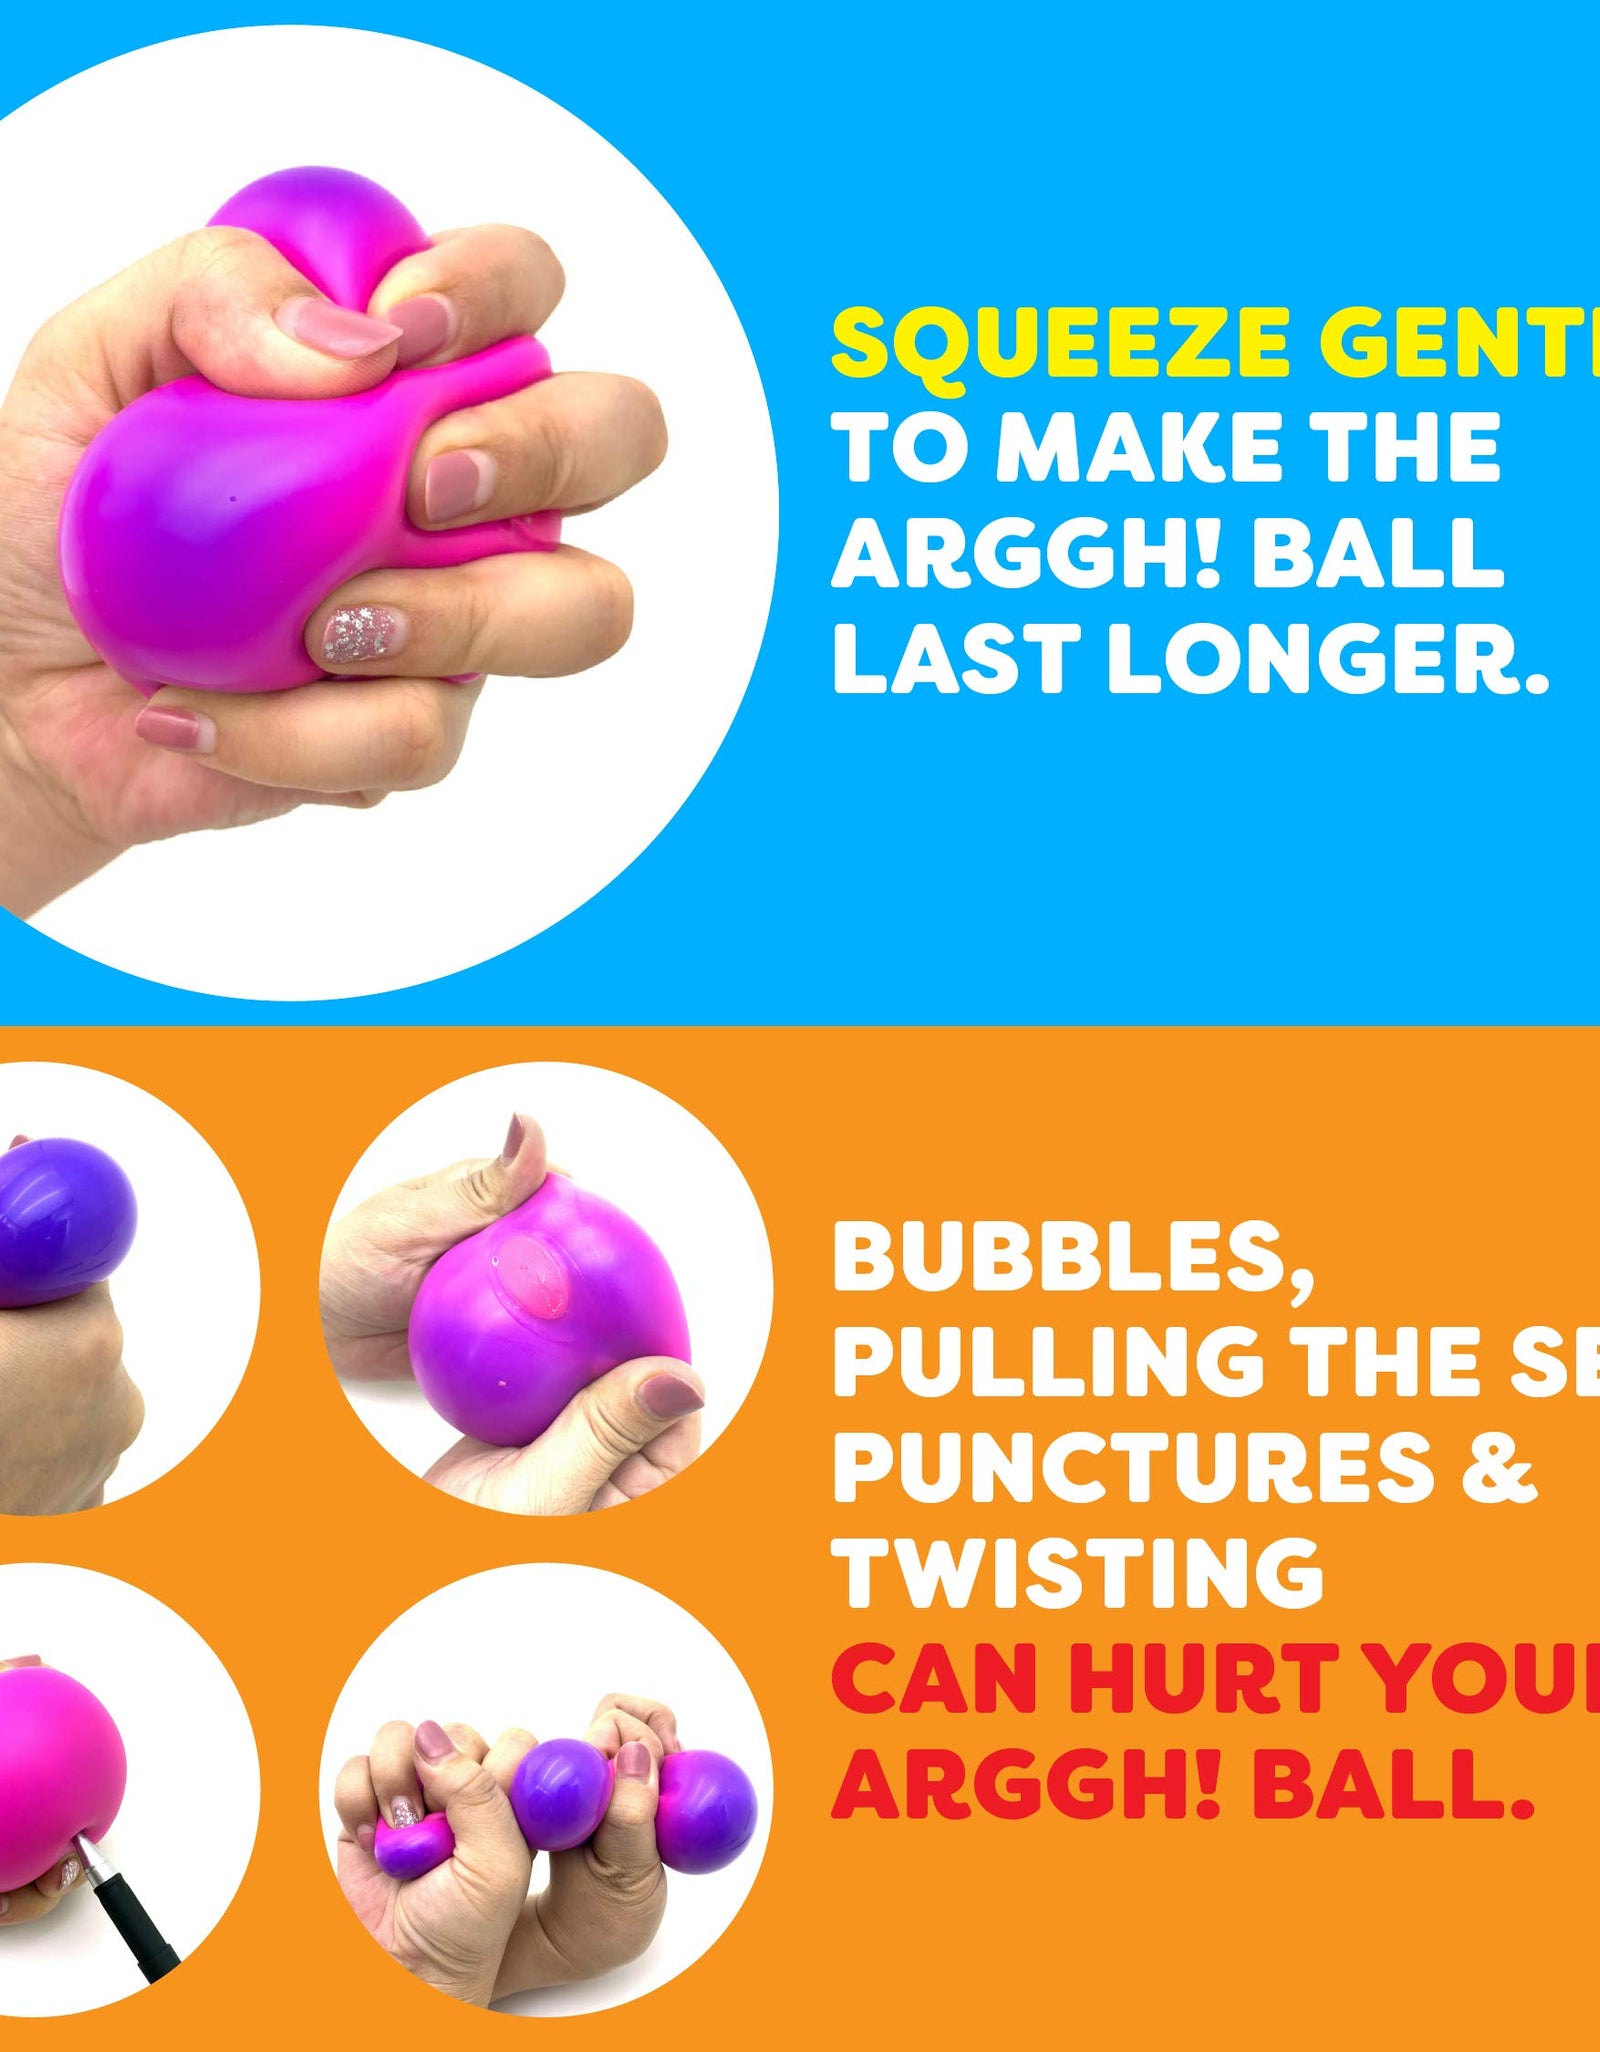 Power Your Fun Arggh Mini Stress Balls for Adults and Kids - 3pk Squishy Stress Balls with Light, Medium, Heavy Resistances, Sensory Stress and Anxiety Relief Squeeze Toys (Yellow, Pink, Blue)